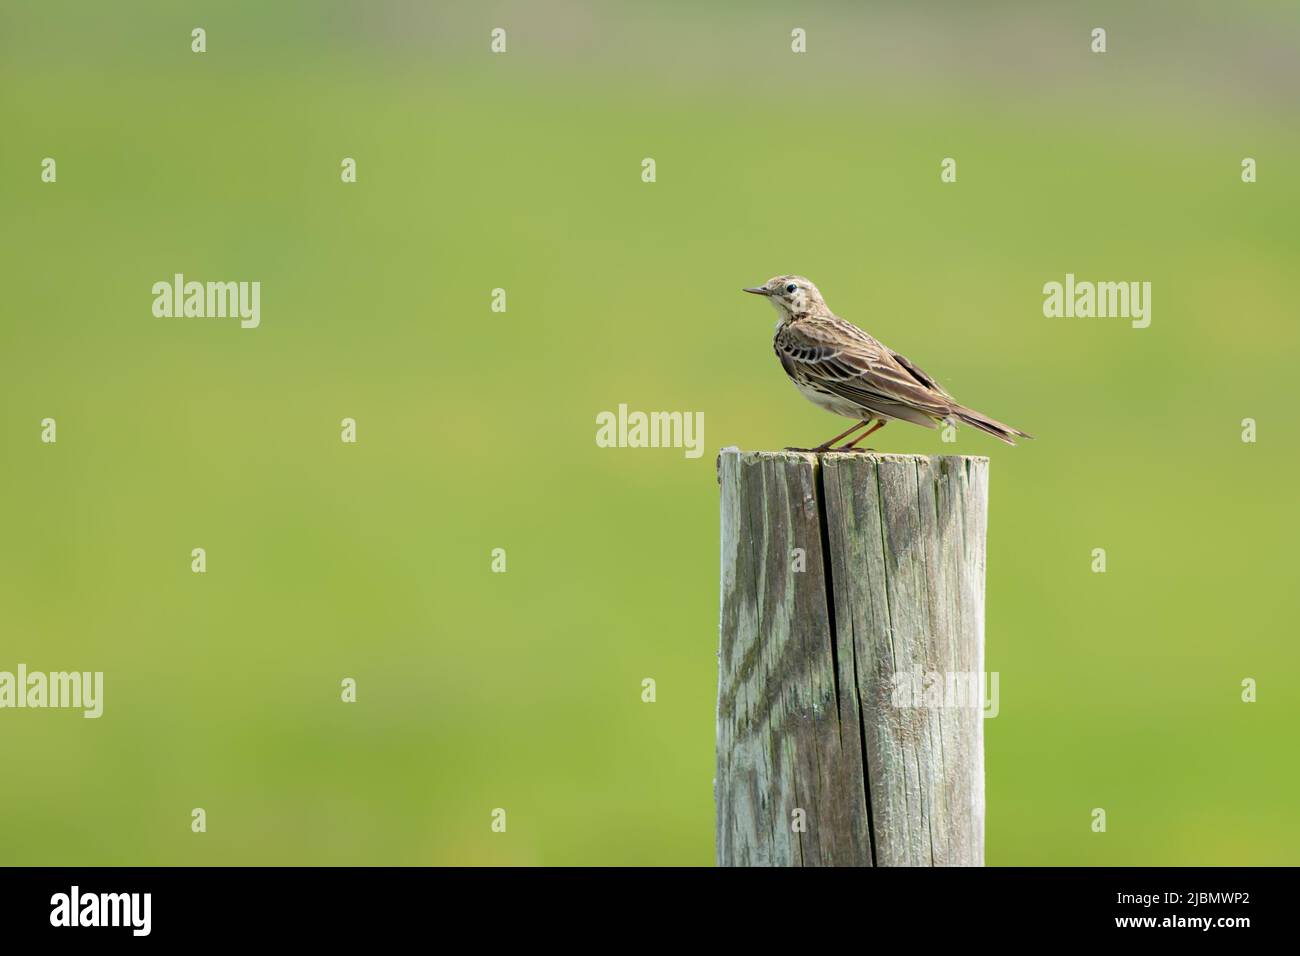 A meadow pipit in profile on a fence post Stock Photo